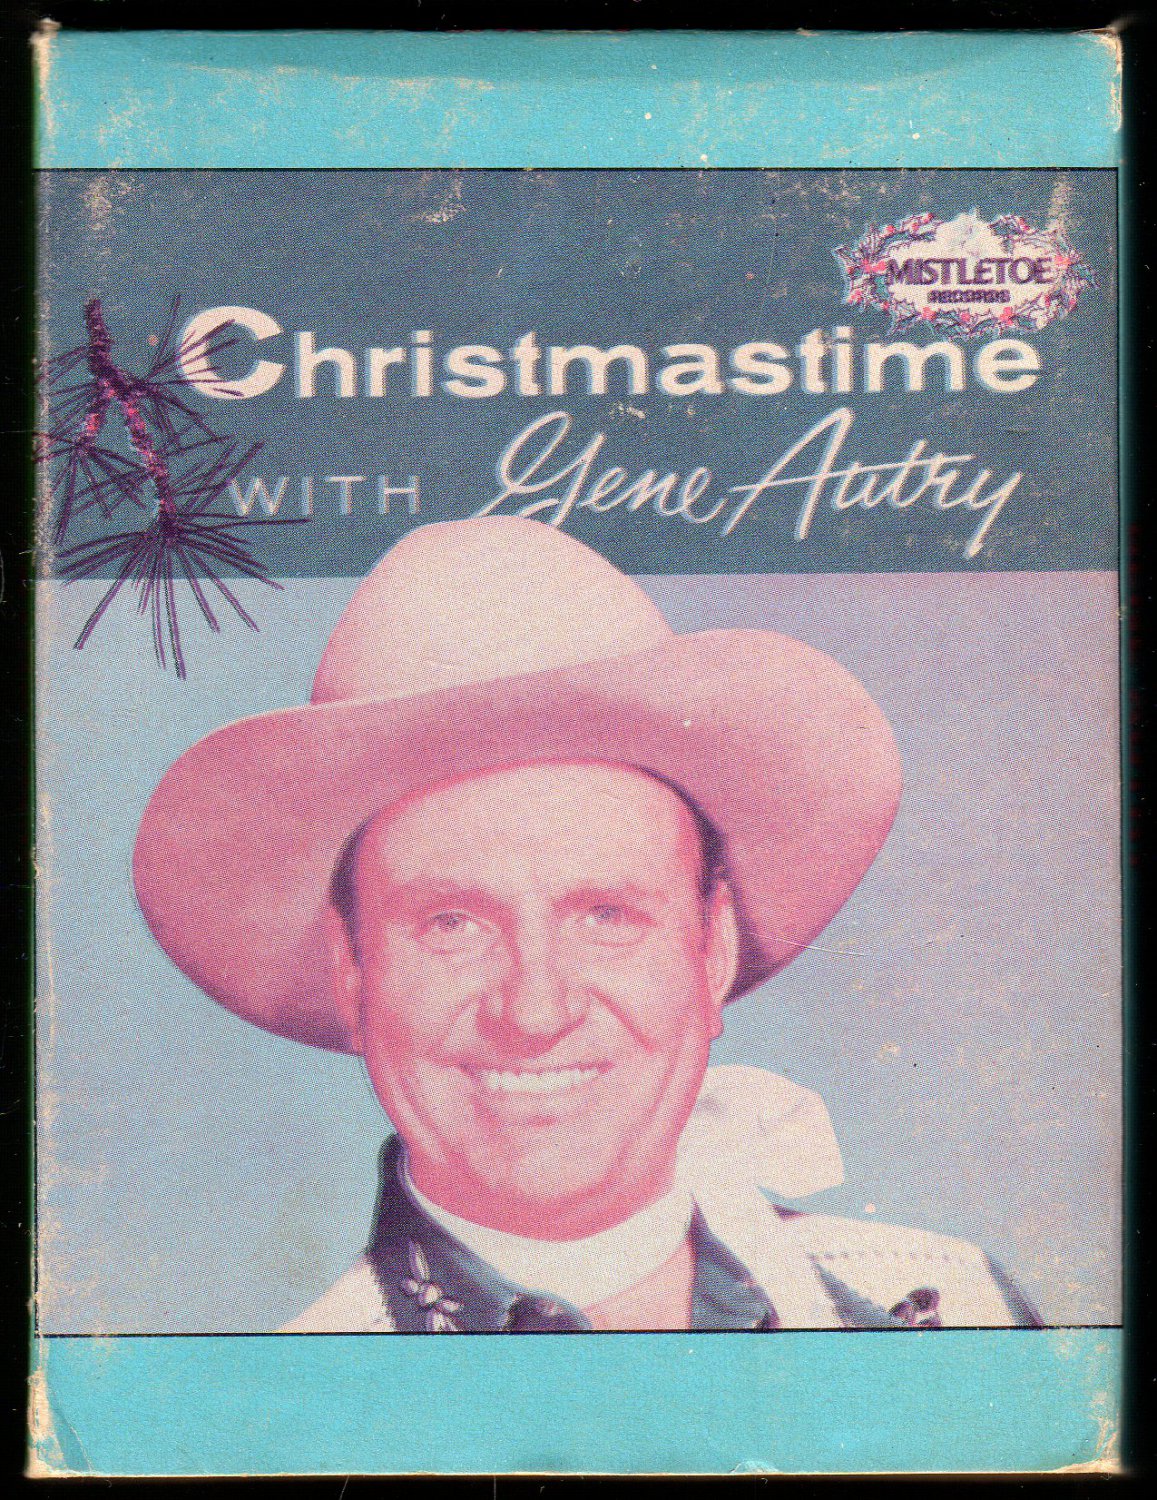 Gene Autry - Christmastime With Gene Autry 1958 MISTLETOE Re-issue A28 8-TRACK TAPE